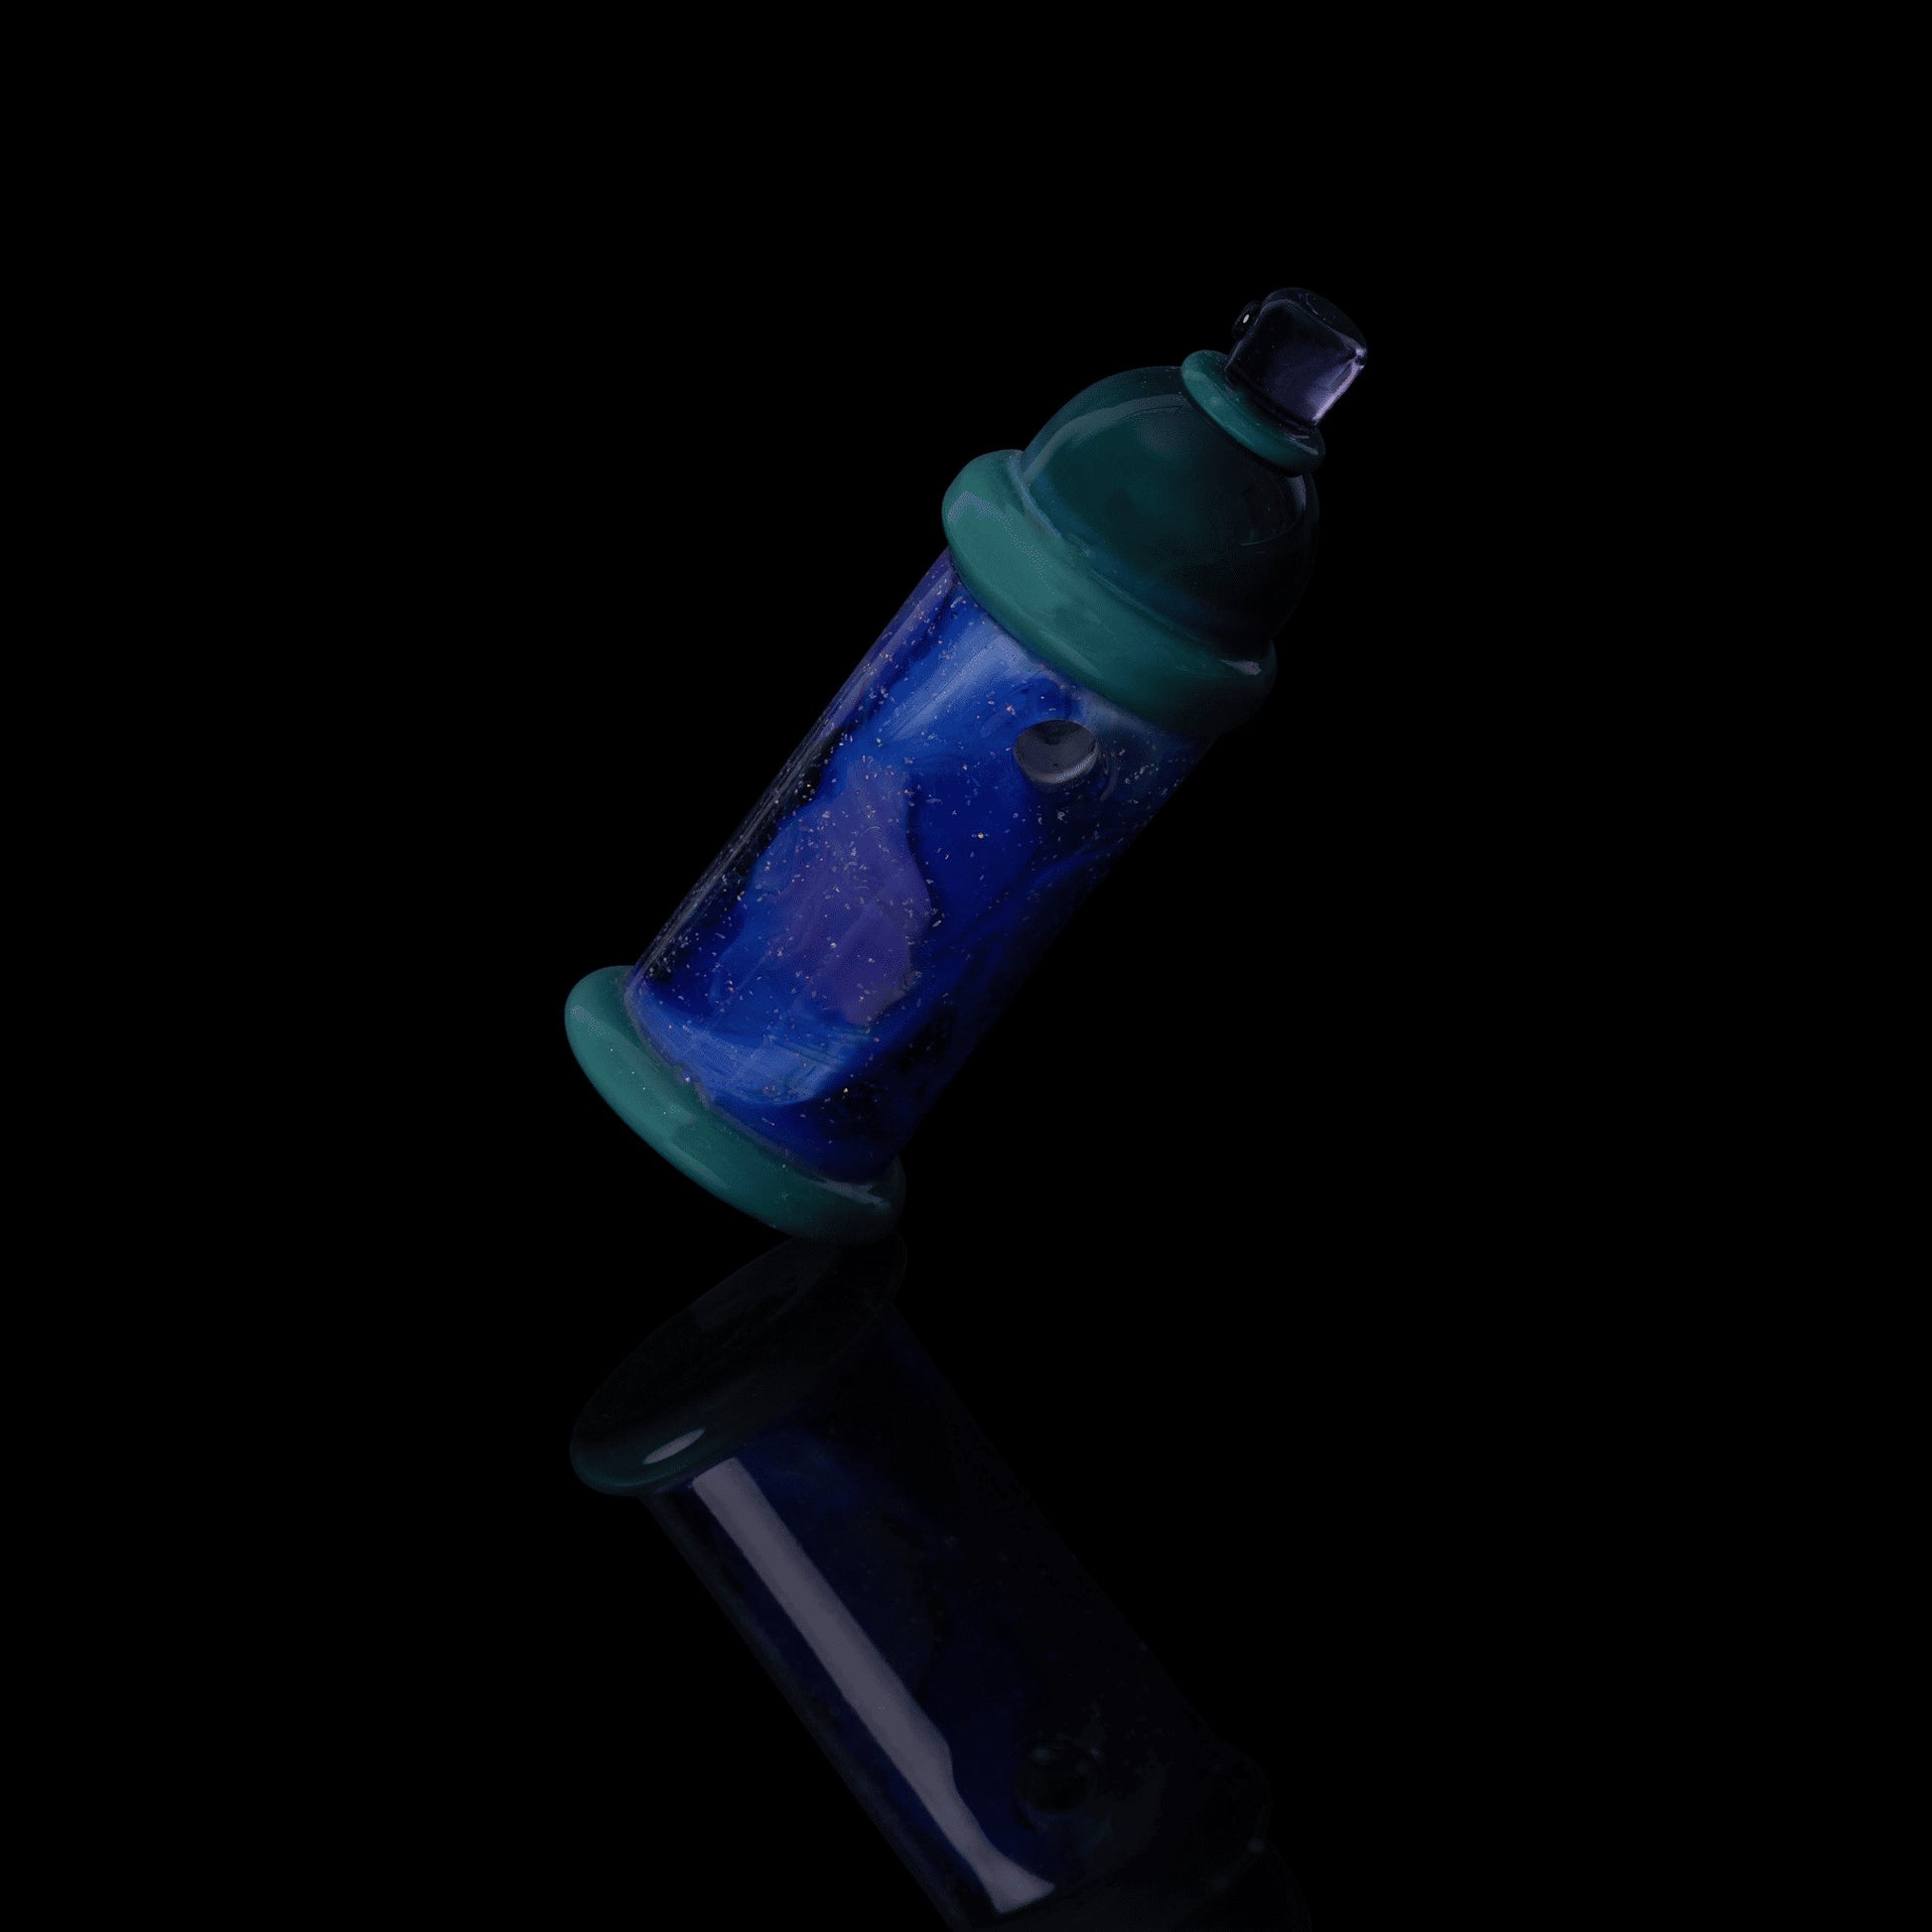 meticulously crafted glass pendant - Collab Spray Can Pendant by Rone x Scomo Moanet (Scribble Season 2022)